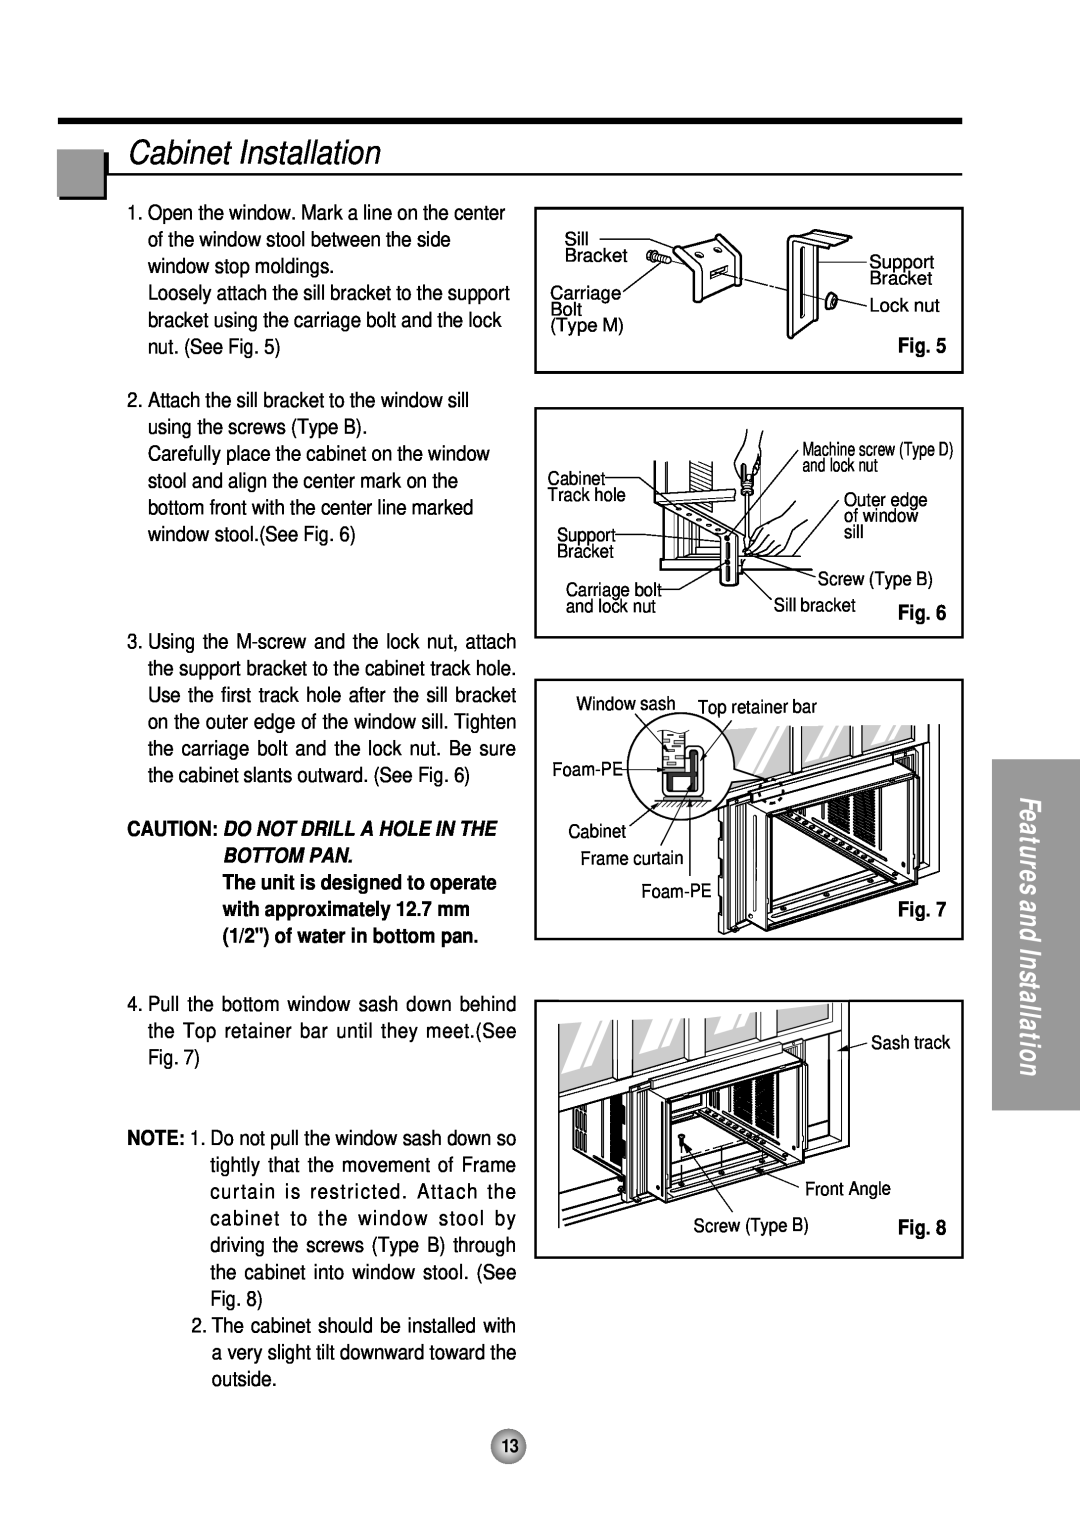 Panasonic CW-XC185HU, CW-XC145HU manual Cabinet Installation, Caution Do Not Drill A Hole In The Bottom Pan, Features and 